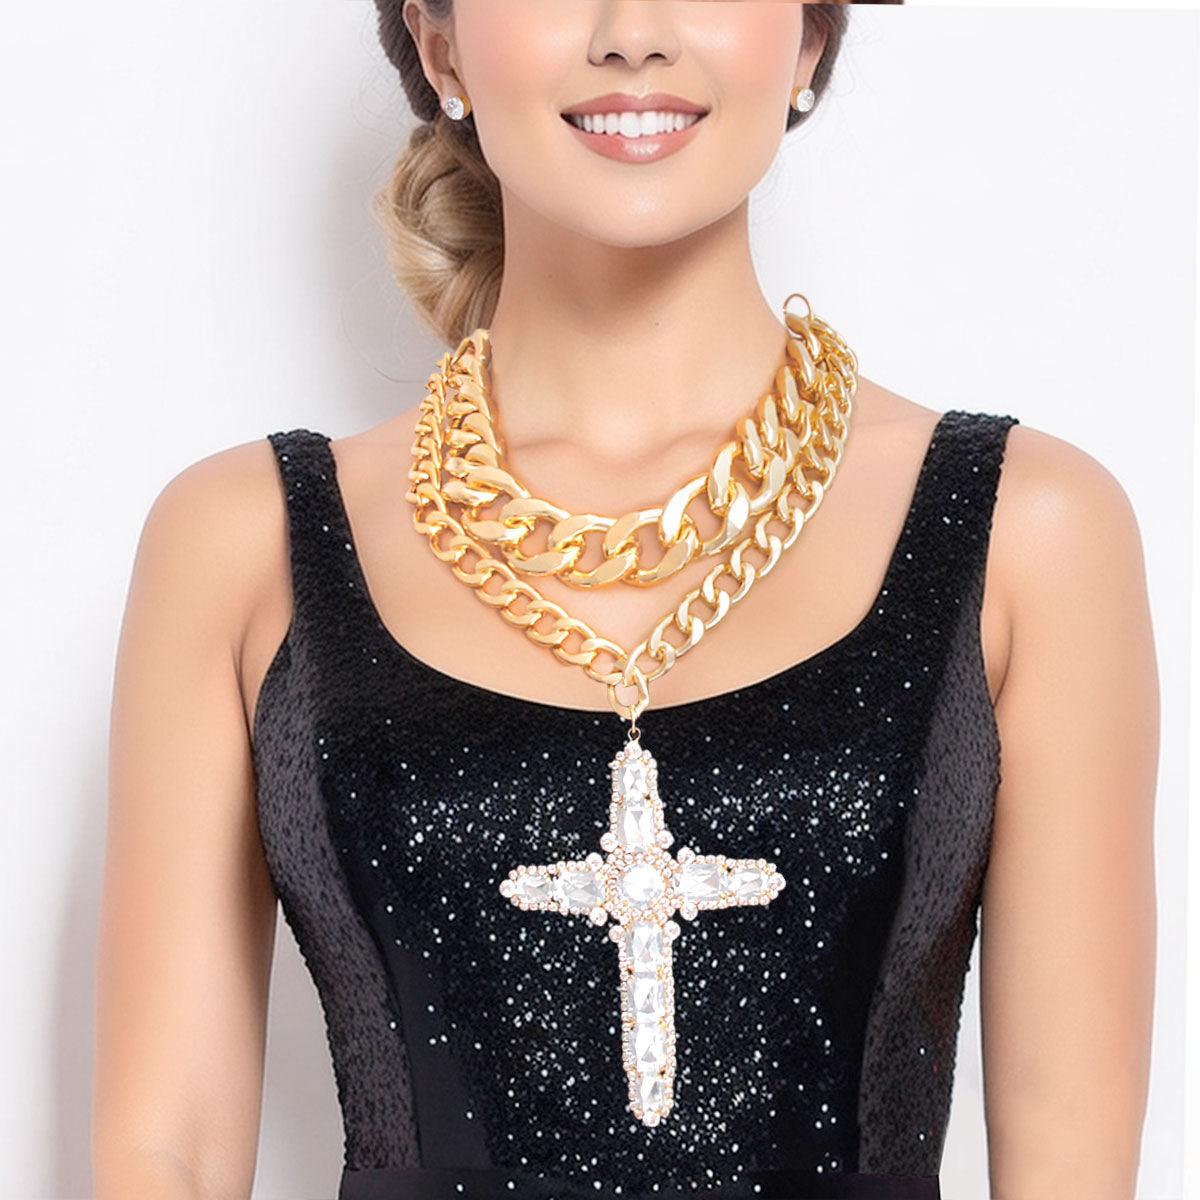 Shine Bright: Captivating Gold Tone Necklace with Cross Pendant